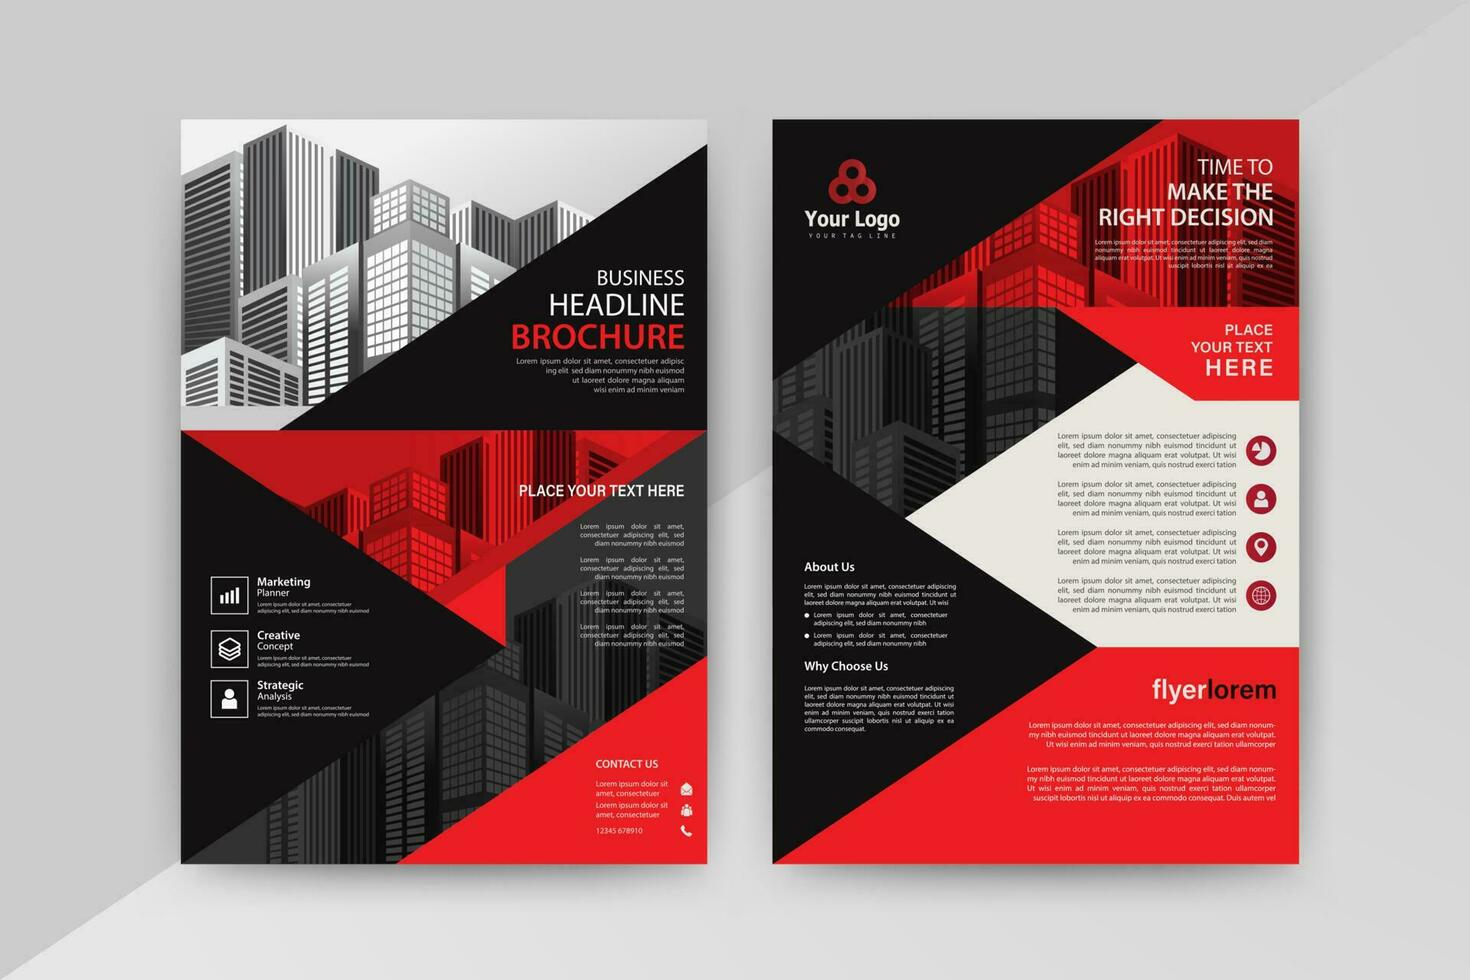 Business abstract vector template for Flyer, Brochure, AnnualReport, Magazine, Poster, Corporate Presentation, Portfolio, Market, infographic with Red and Black color size A4, Front and back.